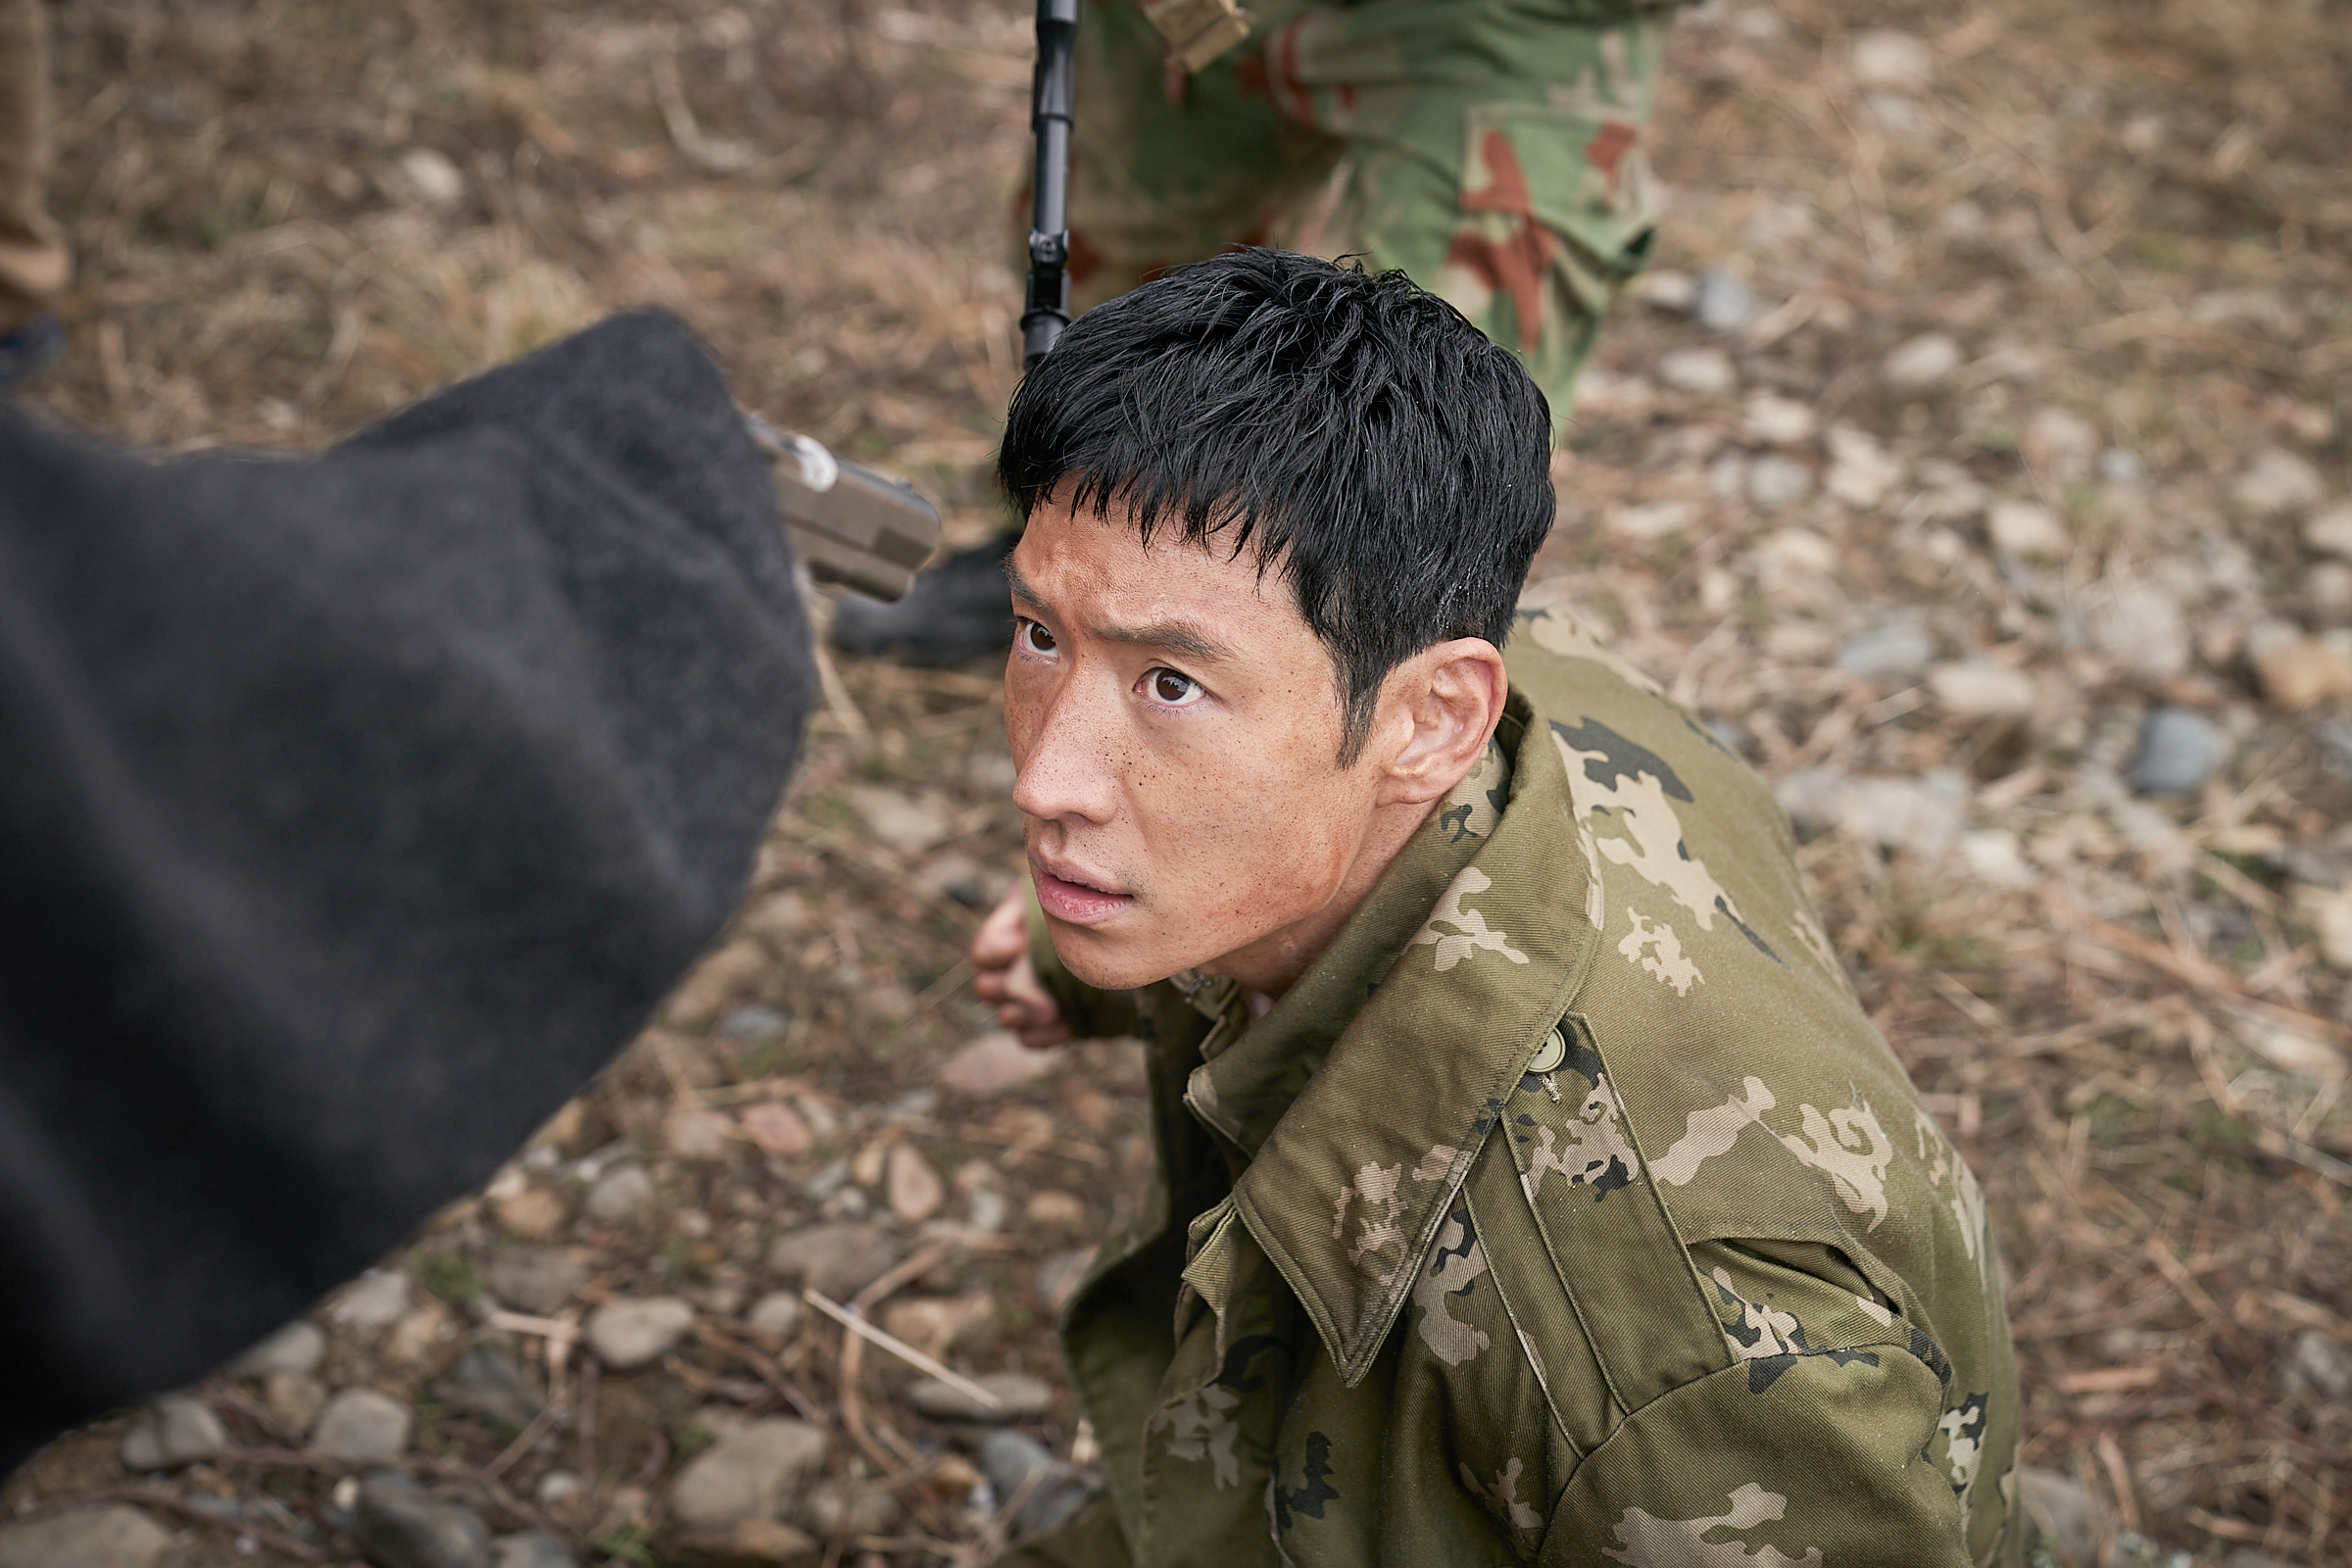 Lee Je Hoon Faces Dangerous Situations During Military Breakout In New Film 